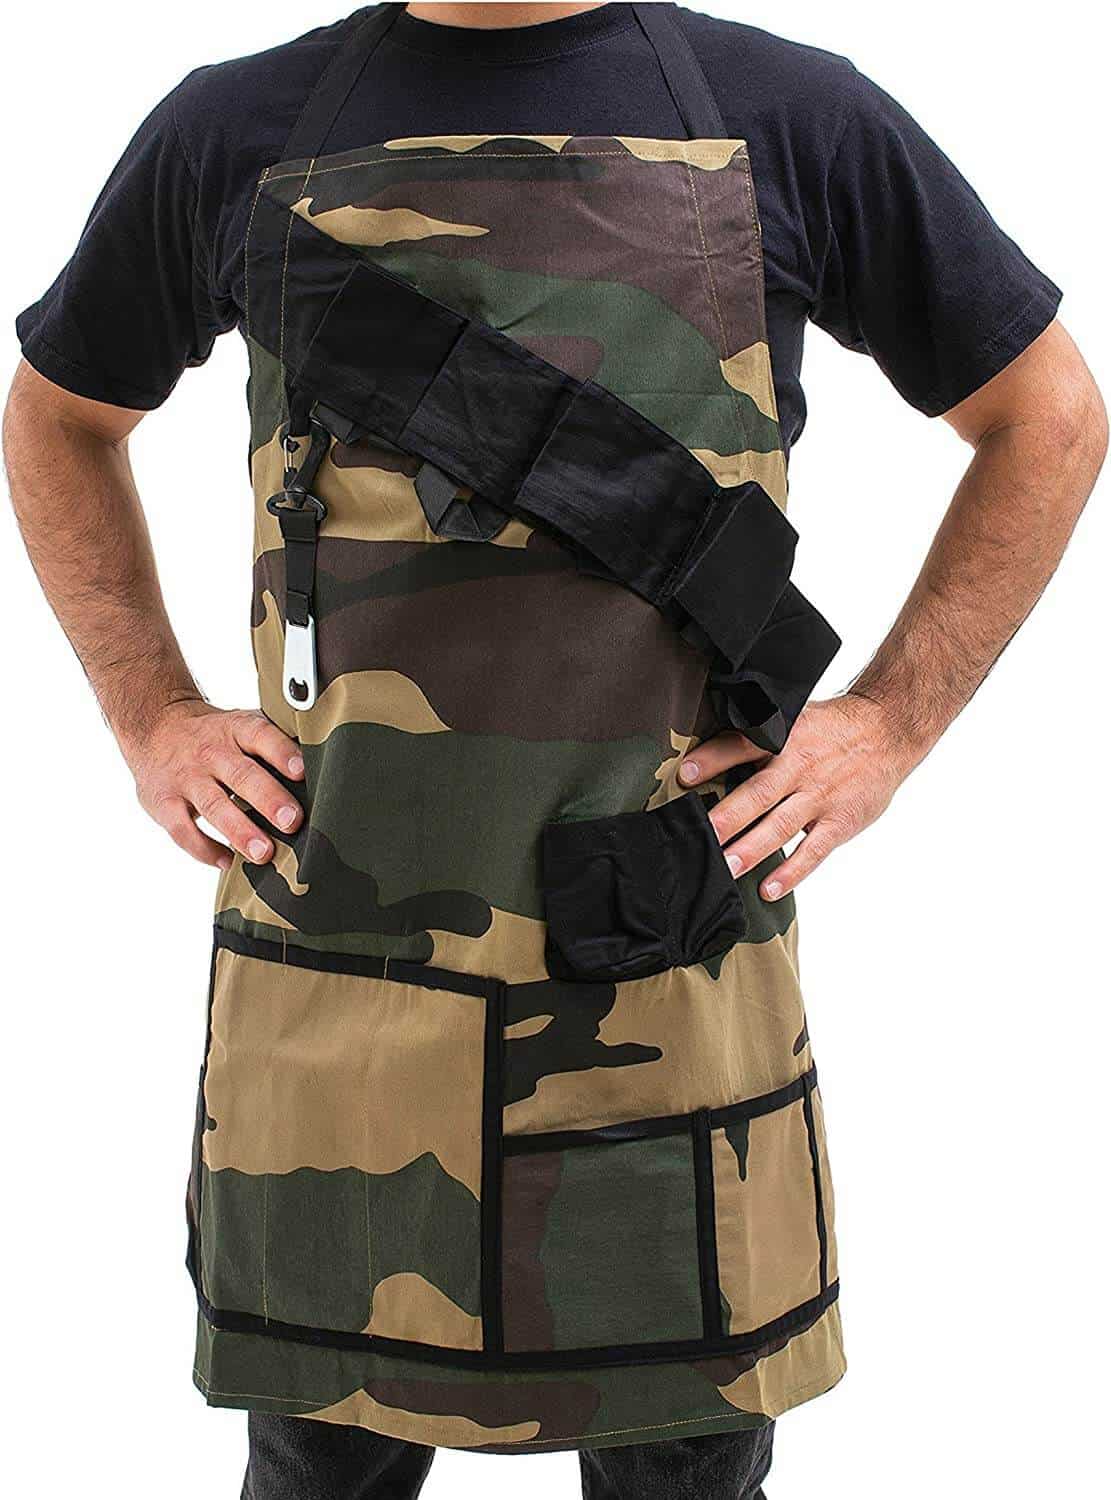 Sergeant BBQ Apron: gifts for veterans ideas